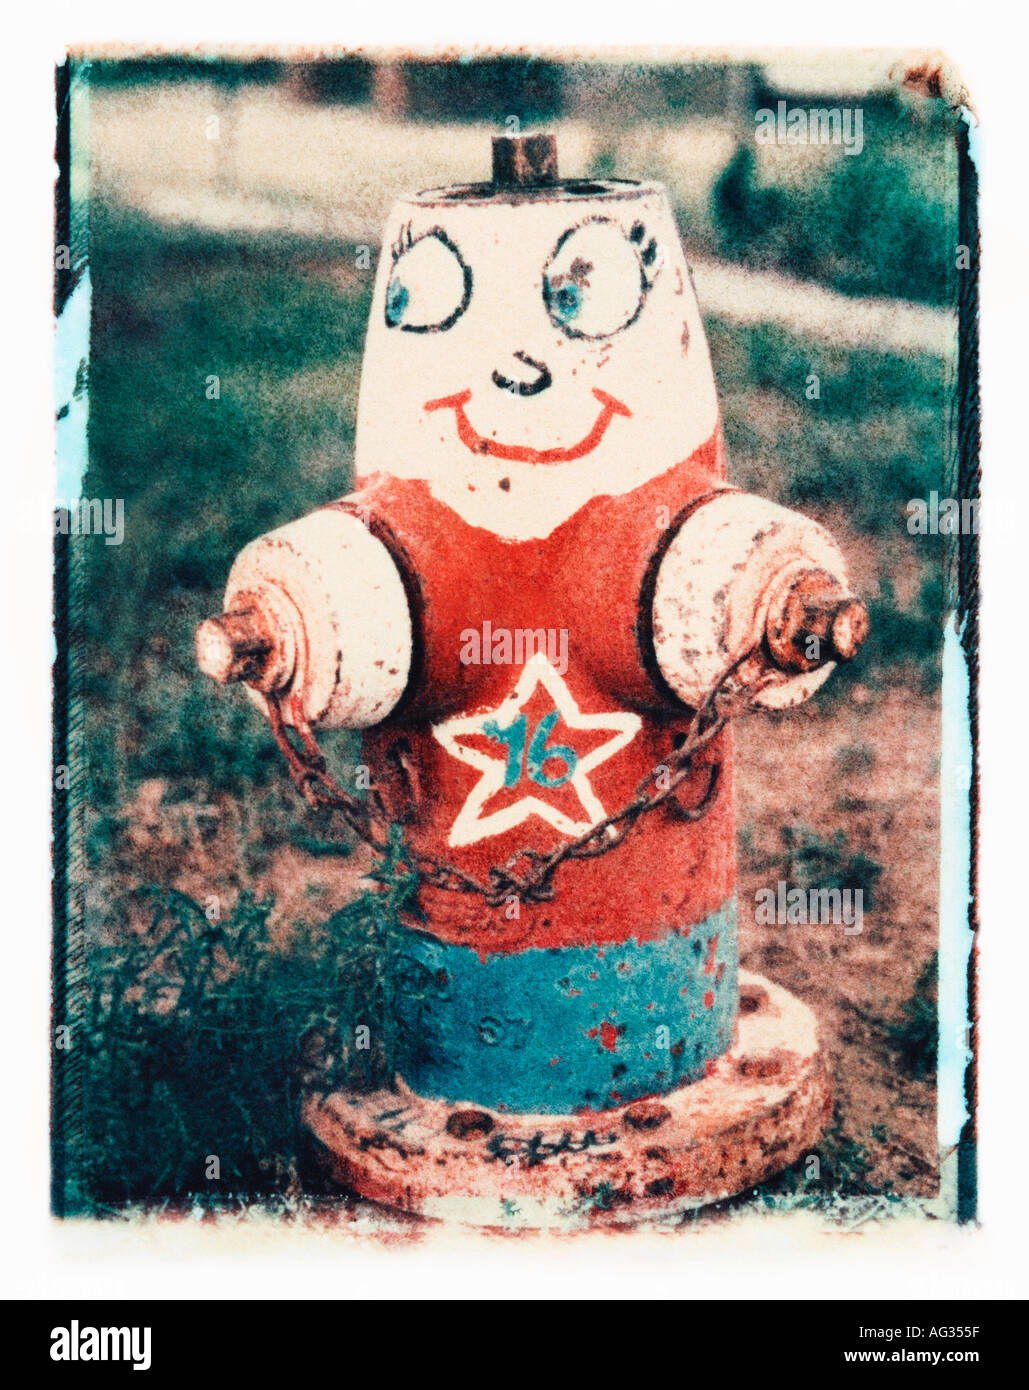 Polaroid transfer image of fire hydrant painted as a human character Stock Photo